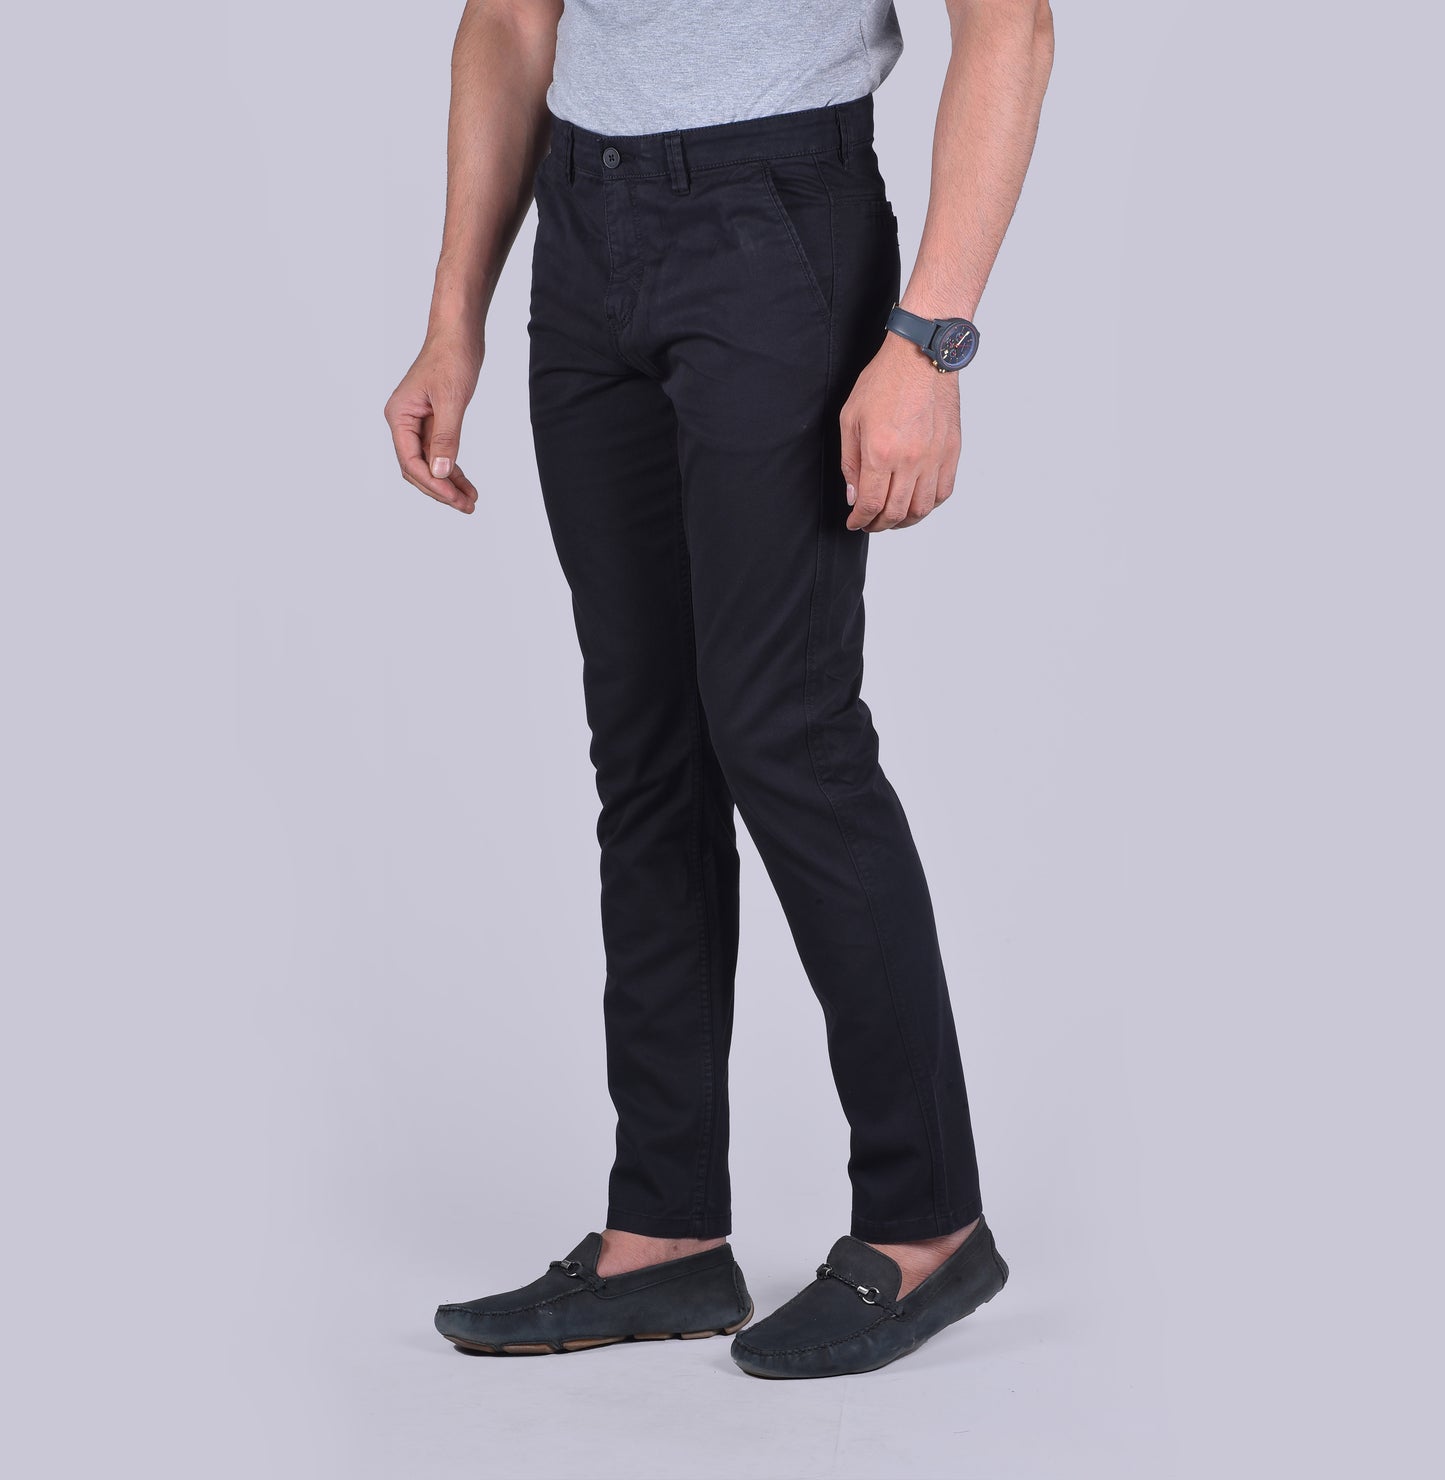 Navy contour fit trousers - urban clothing co.